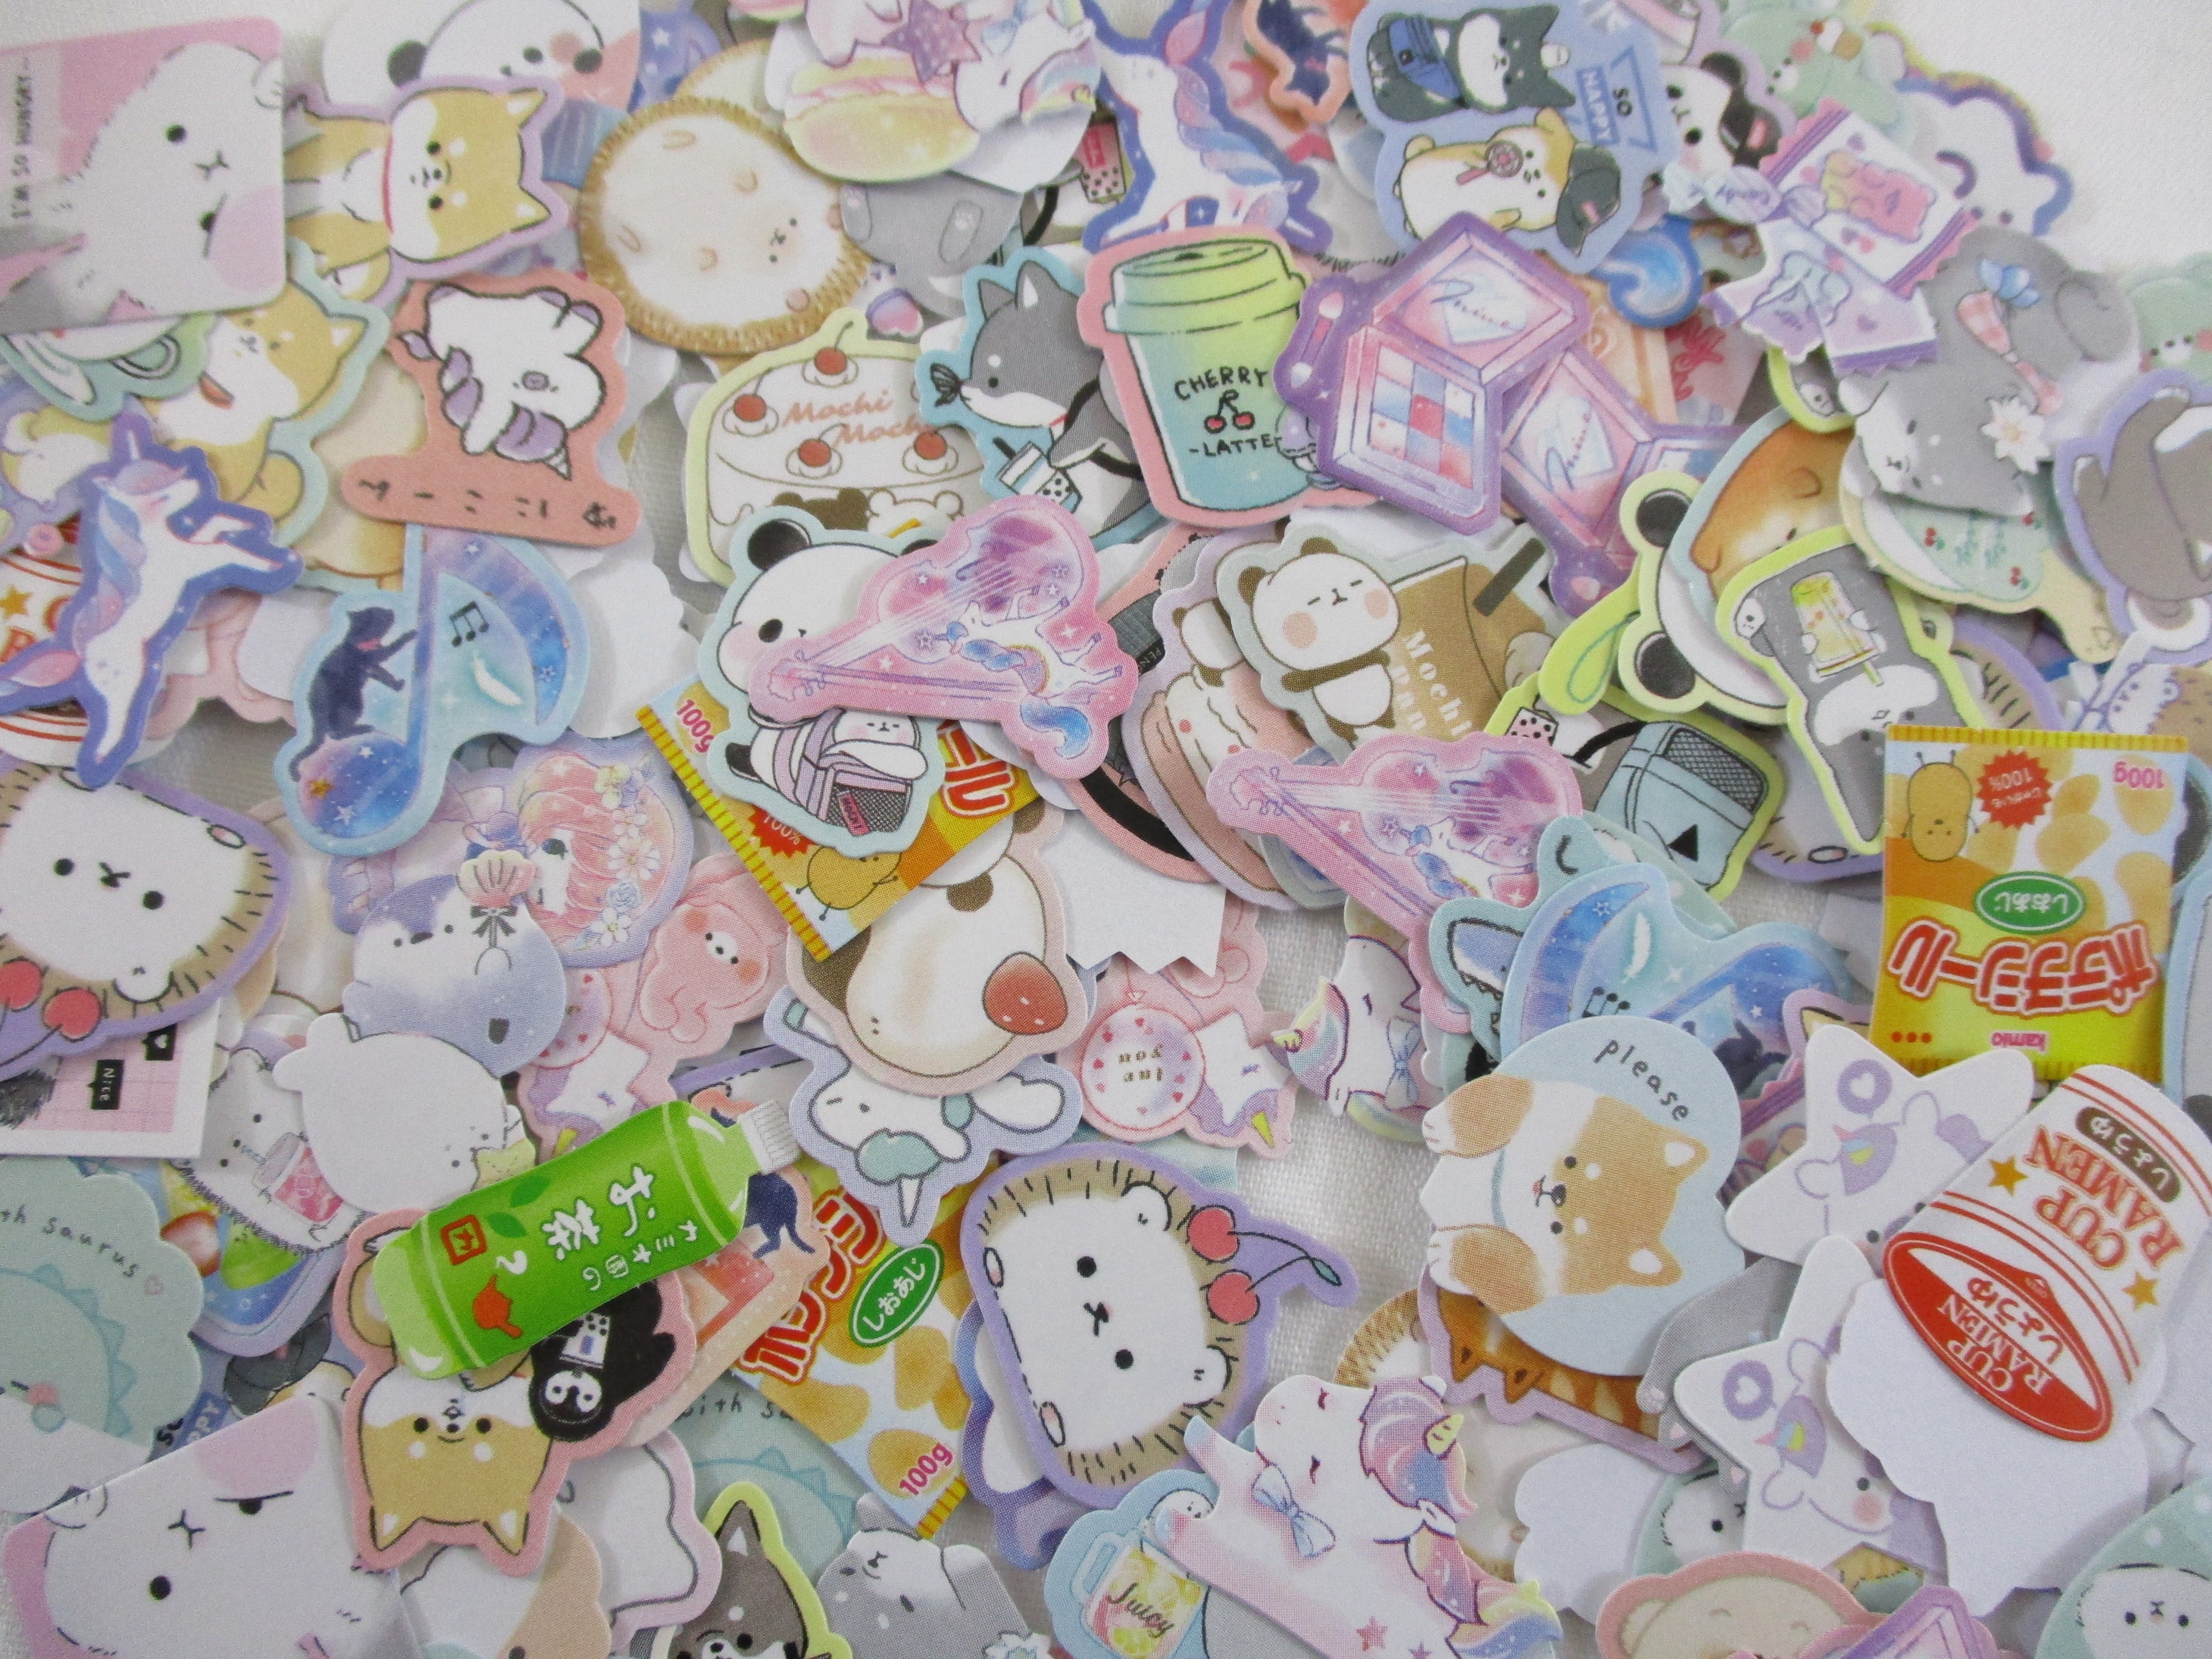 Grab Bag Stickers: 200 pcs for Scrapbooking Journal Craft Planner